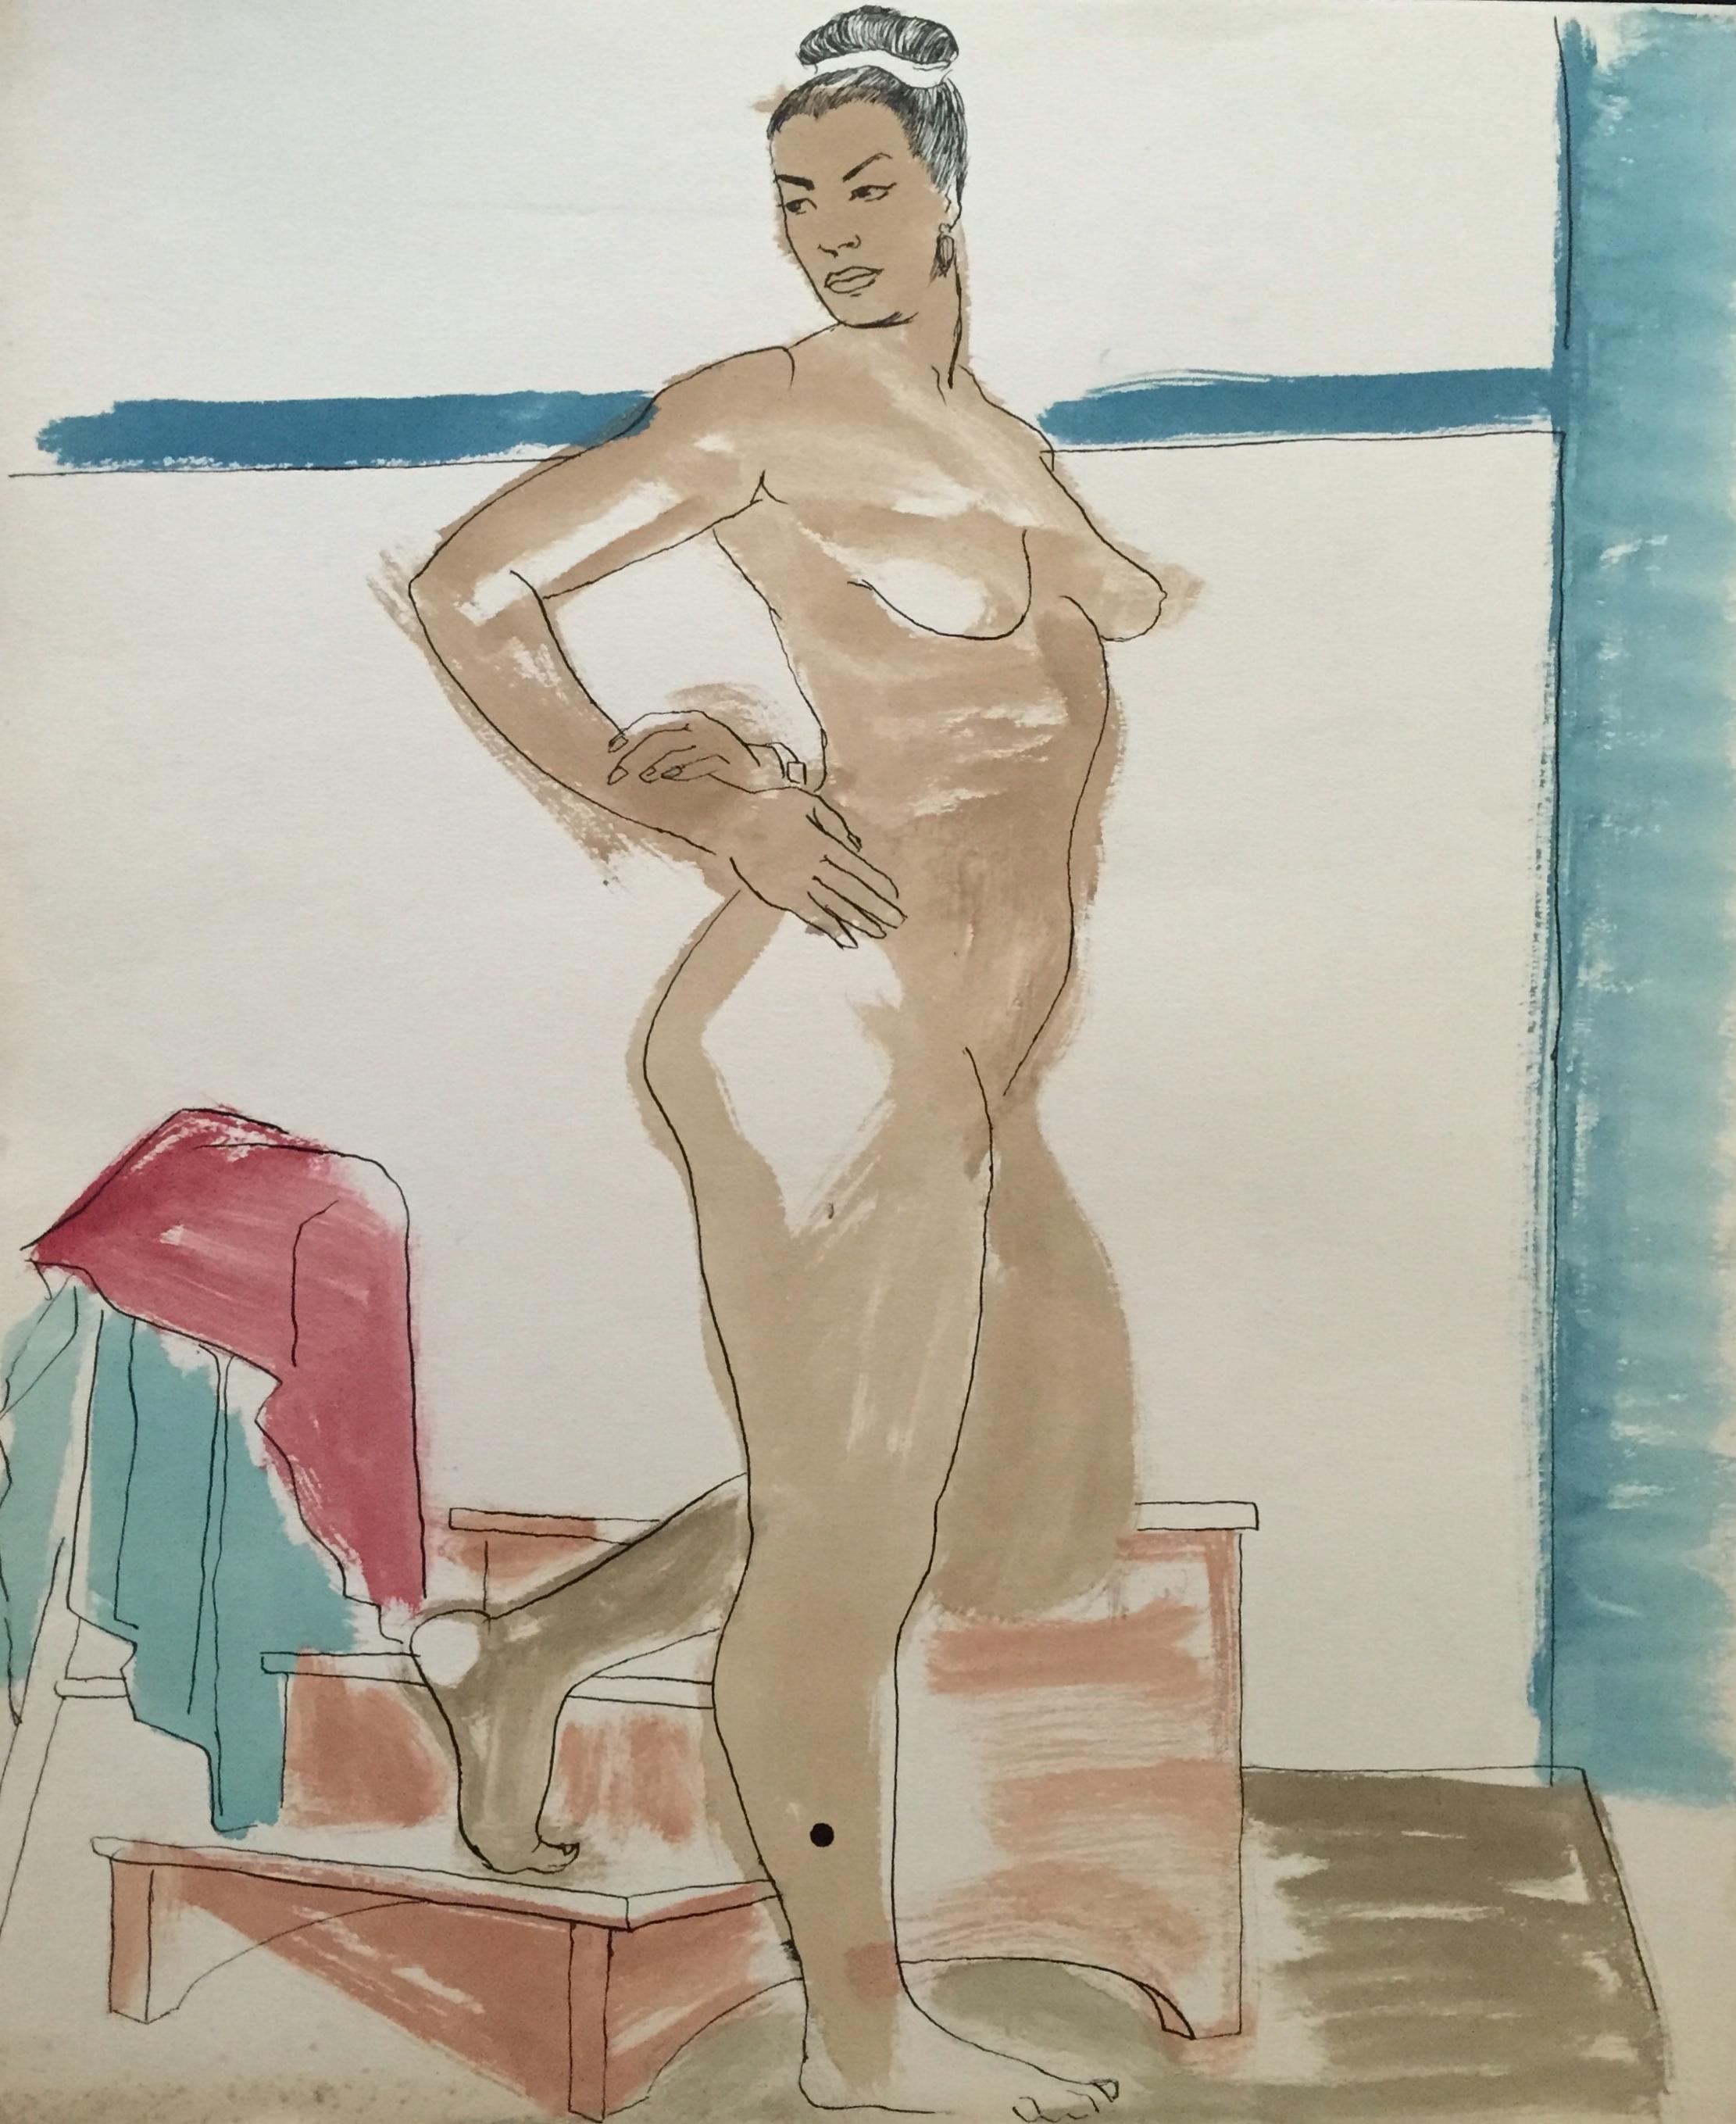 Jerry Opper Figurative Painting - Mid Century Flo Allen Gouache Female Nude Painting SF Diego Rivera, Rothko